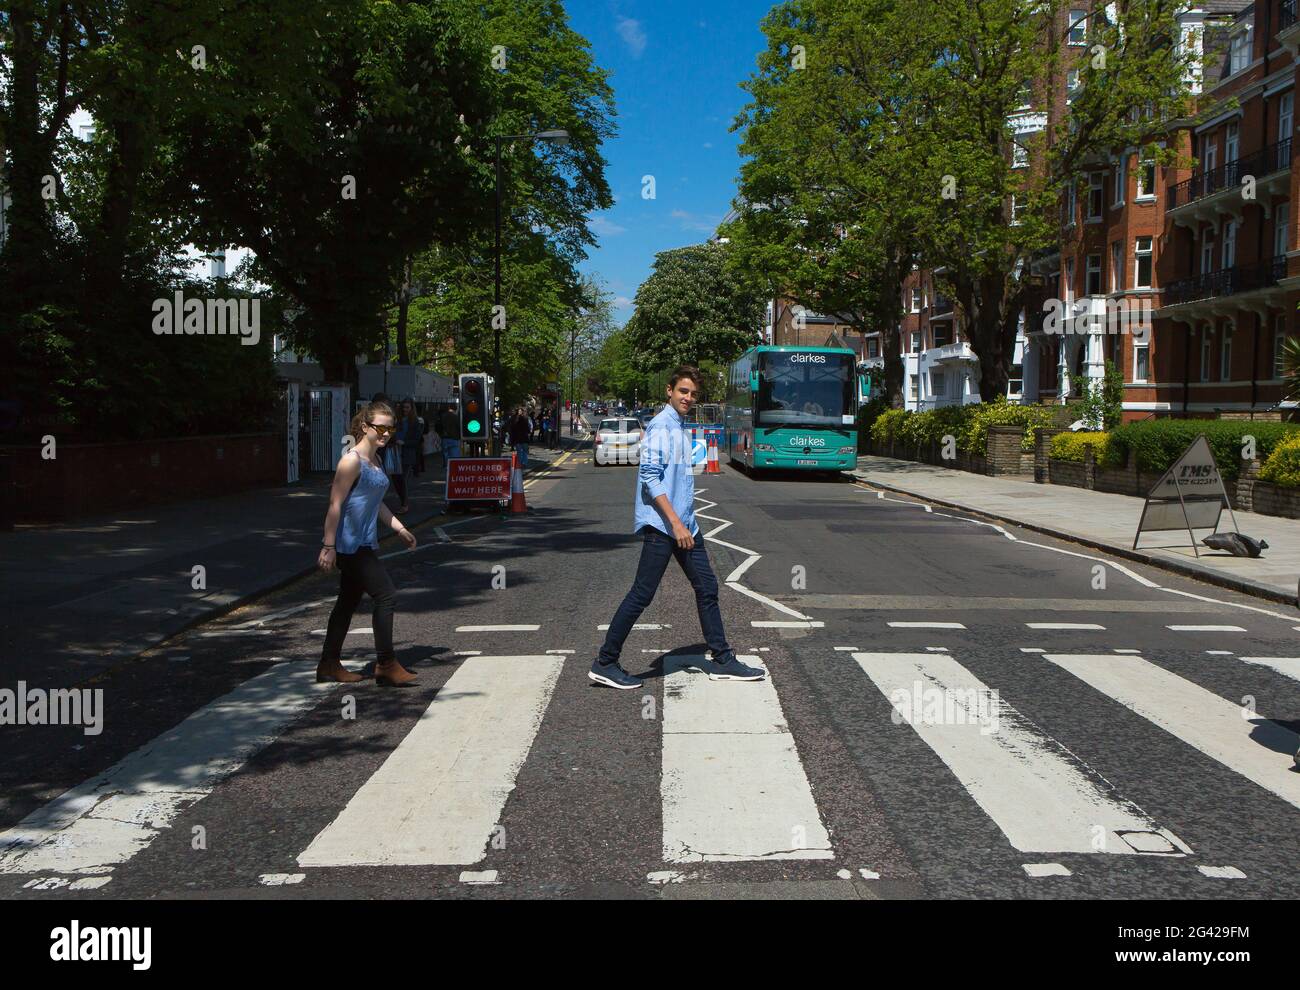 UNITED KINGDOM. ENGLAND. LONDON. ABBEY ROAD. CROSSWALK THAT ILLUSTRATES THE COVER OF THE LAST ALBUM OF THE FAB FOUR (THIS IS THE ONLY NATIONALLY RANKE Stock Photo